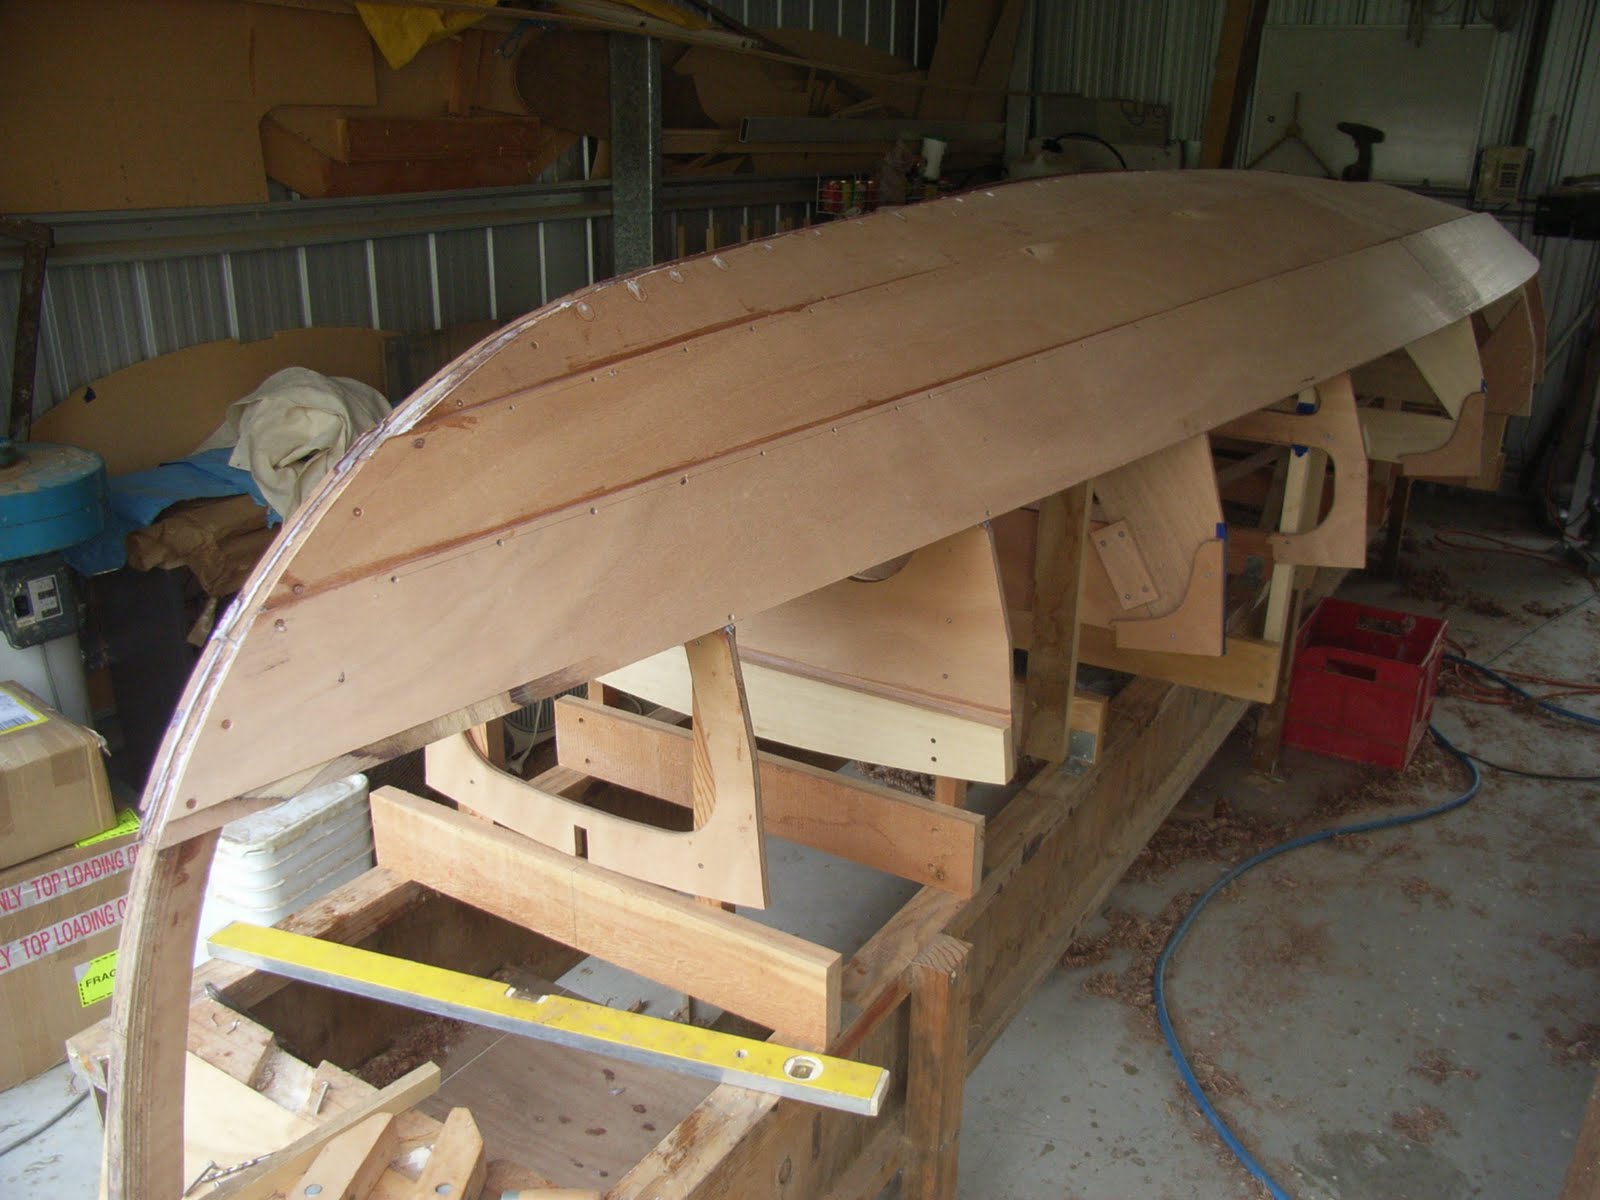 include stitch and glue plywood and glued lapstrake clinker plywood